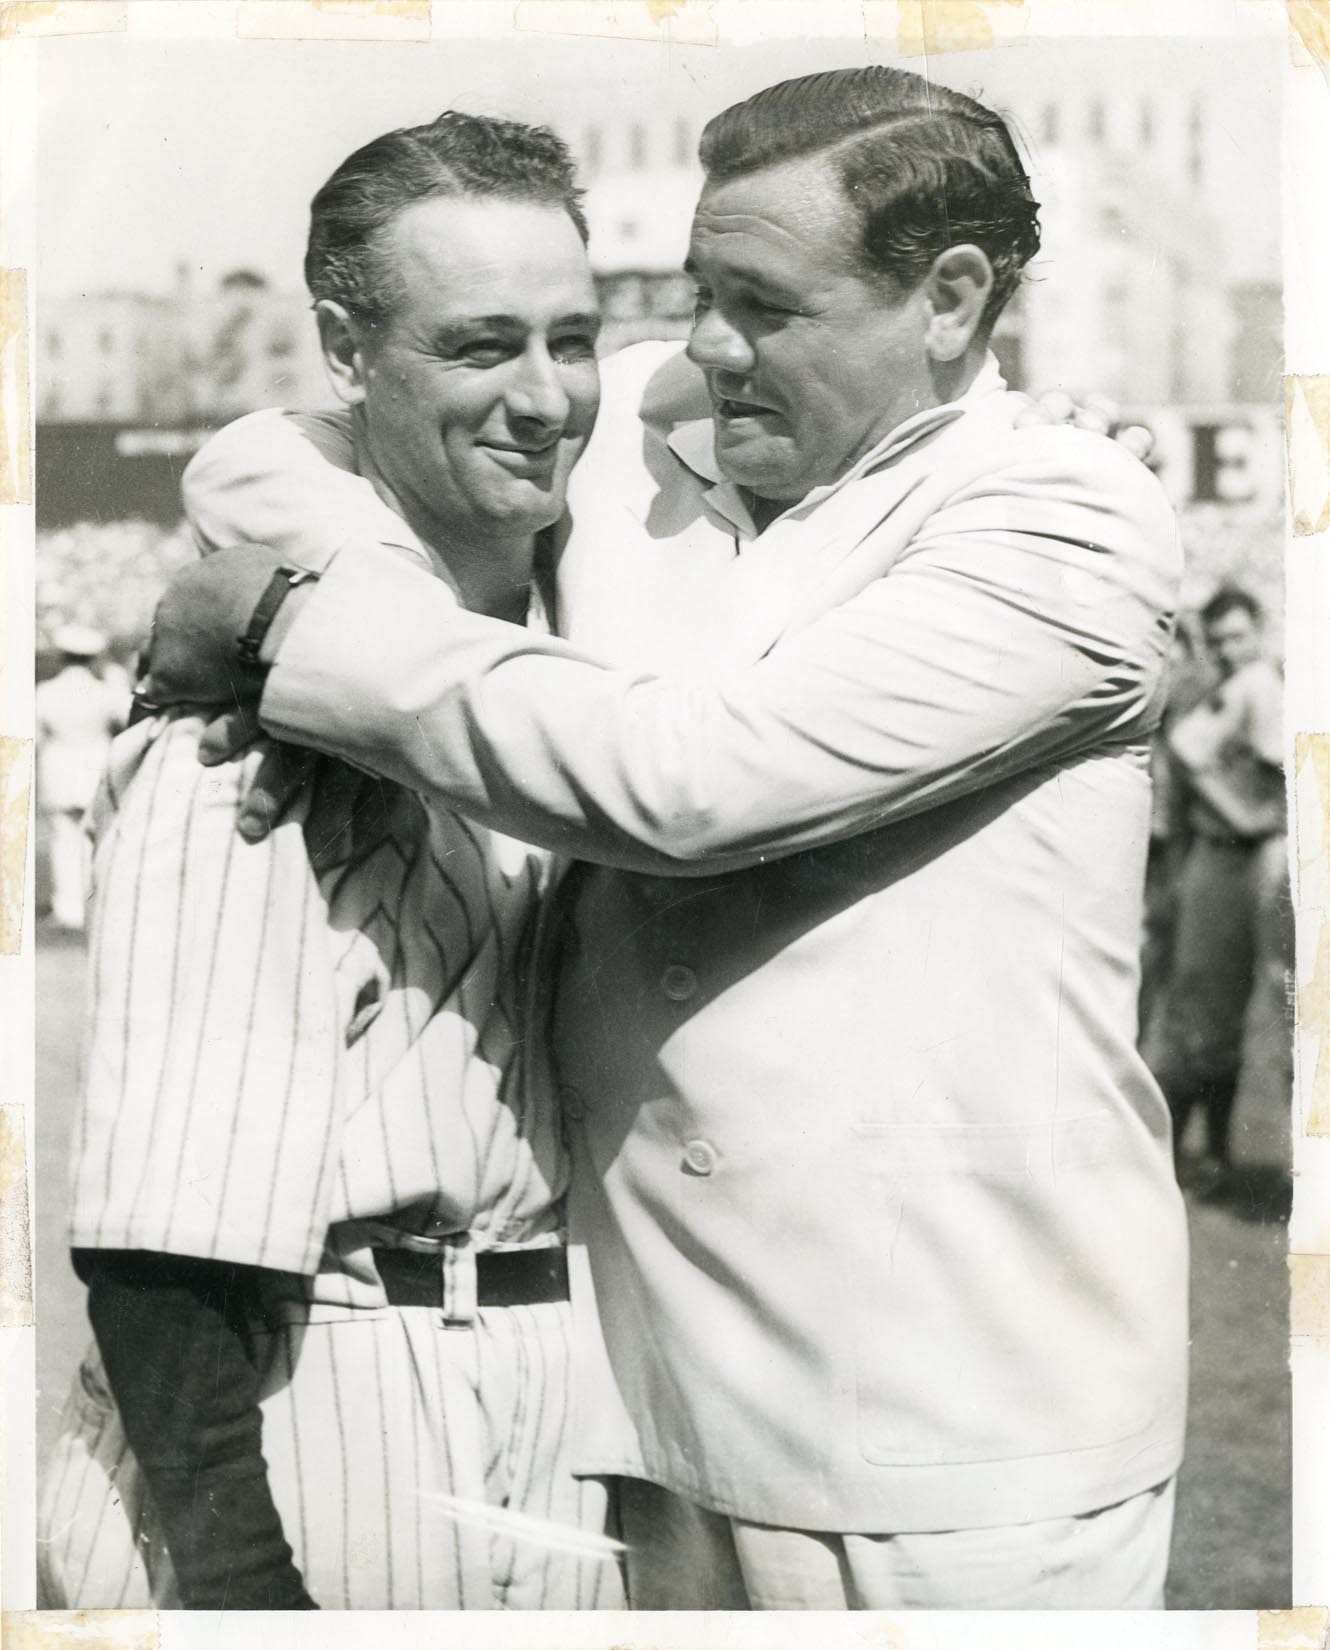 - Babe Greets Lou on "Gehrig Day" Wire Photograph